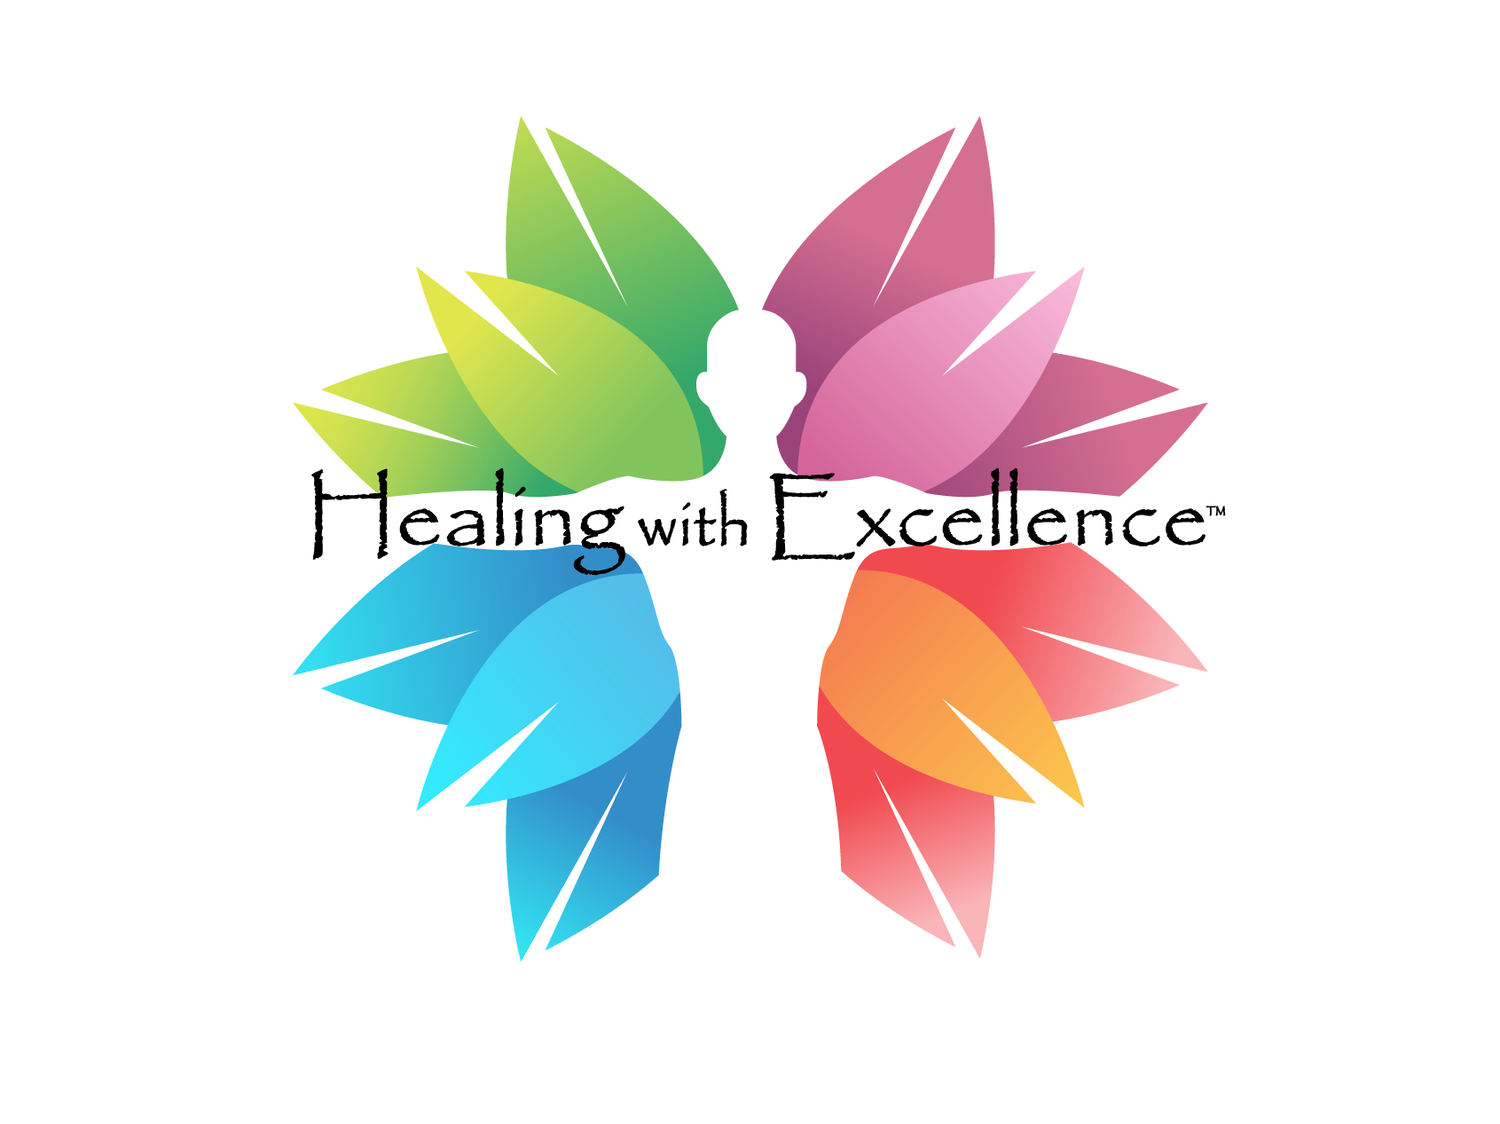 Healing with Excellence